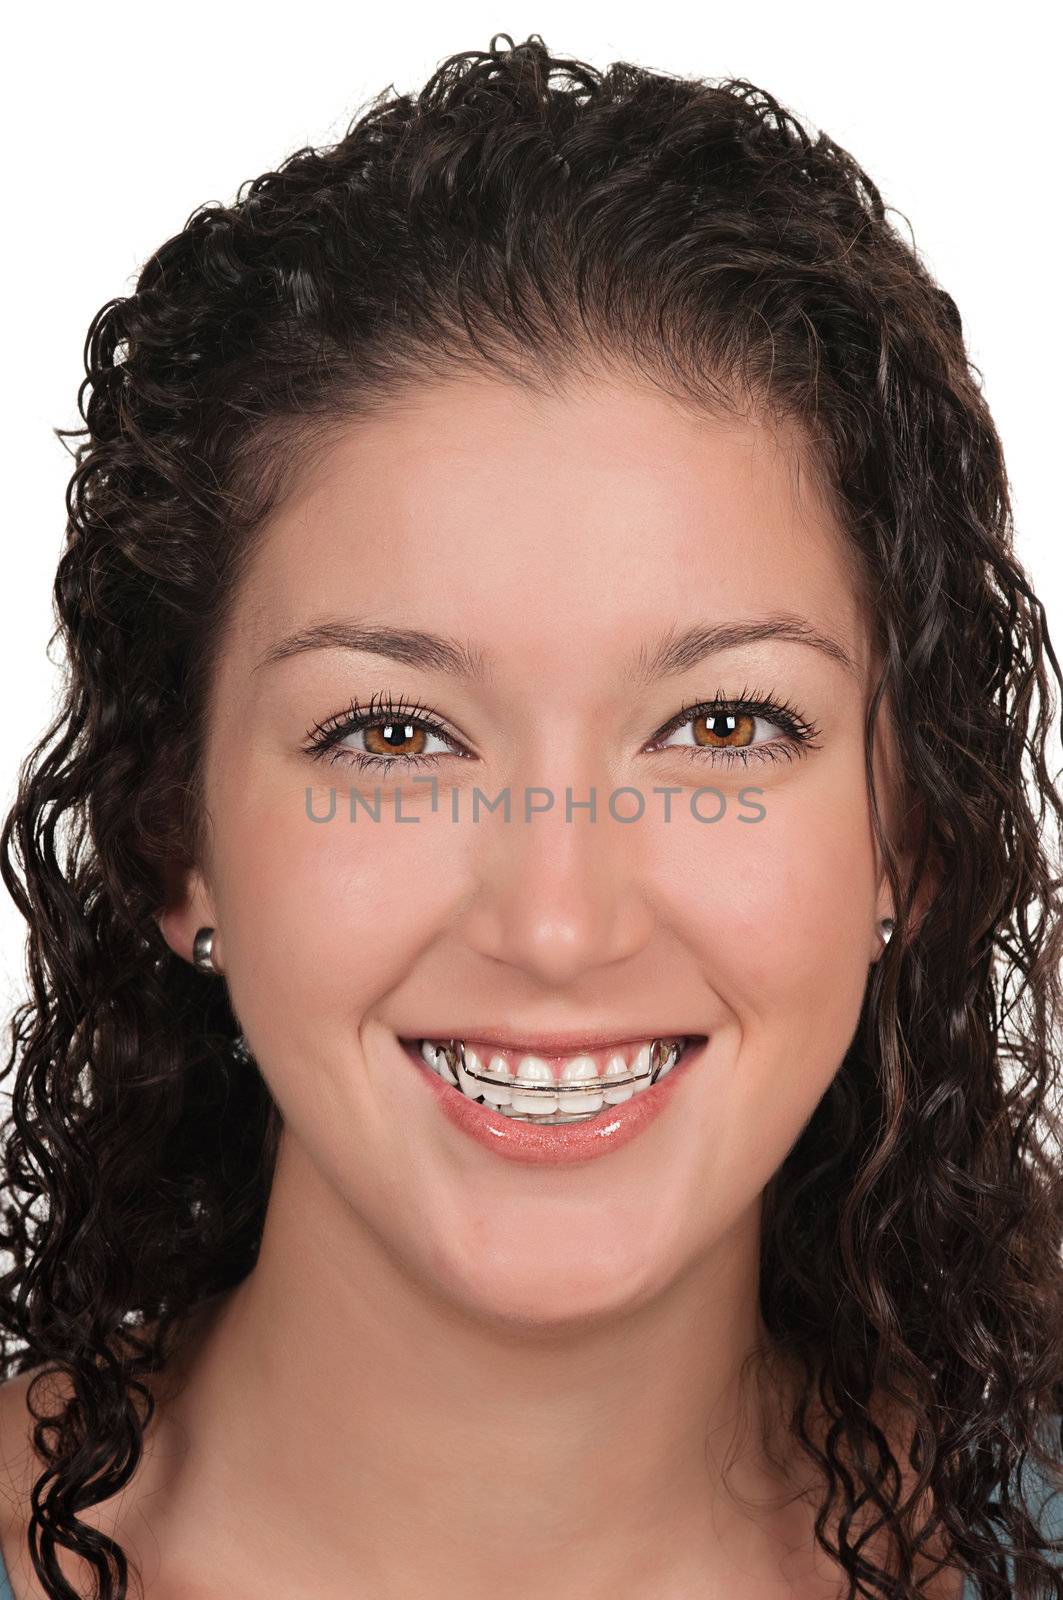 Girl with dental braces ( retainer)
